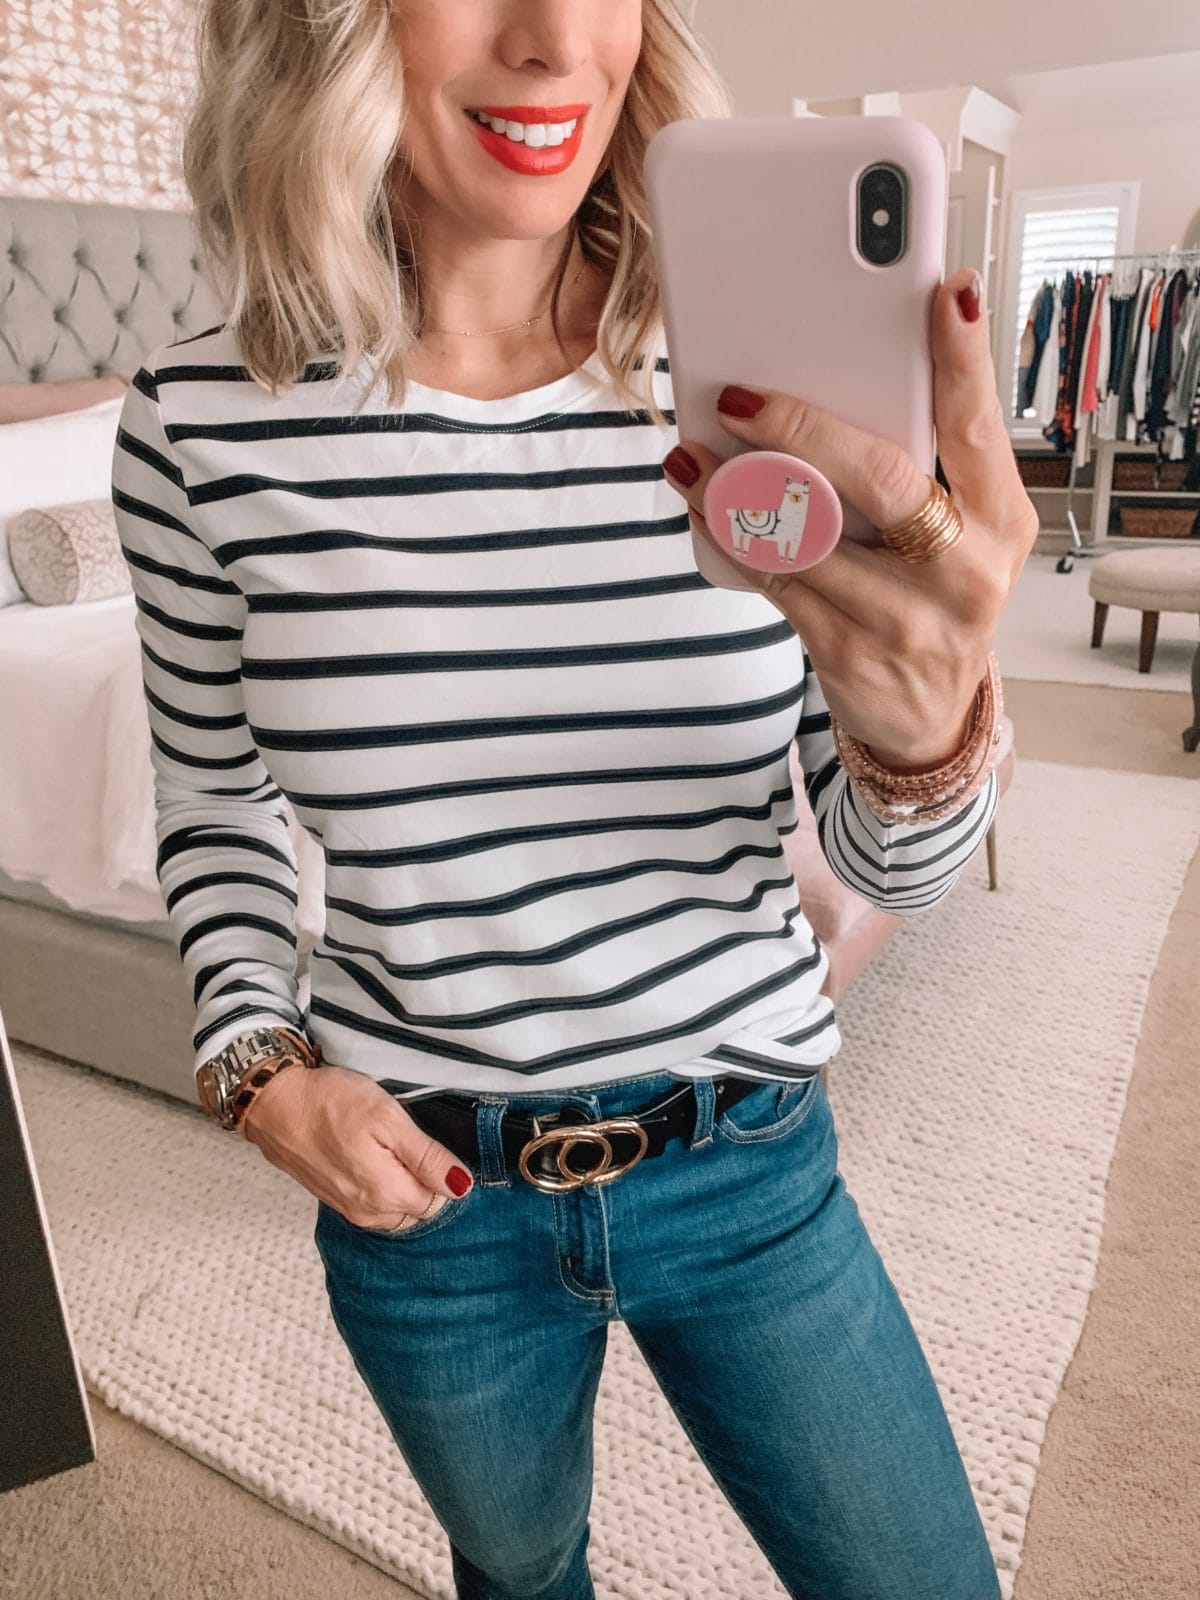 Amazon Prime Fashion- Striped Top and Jeans 